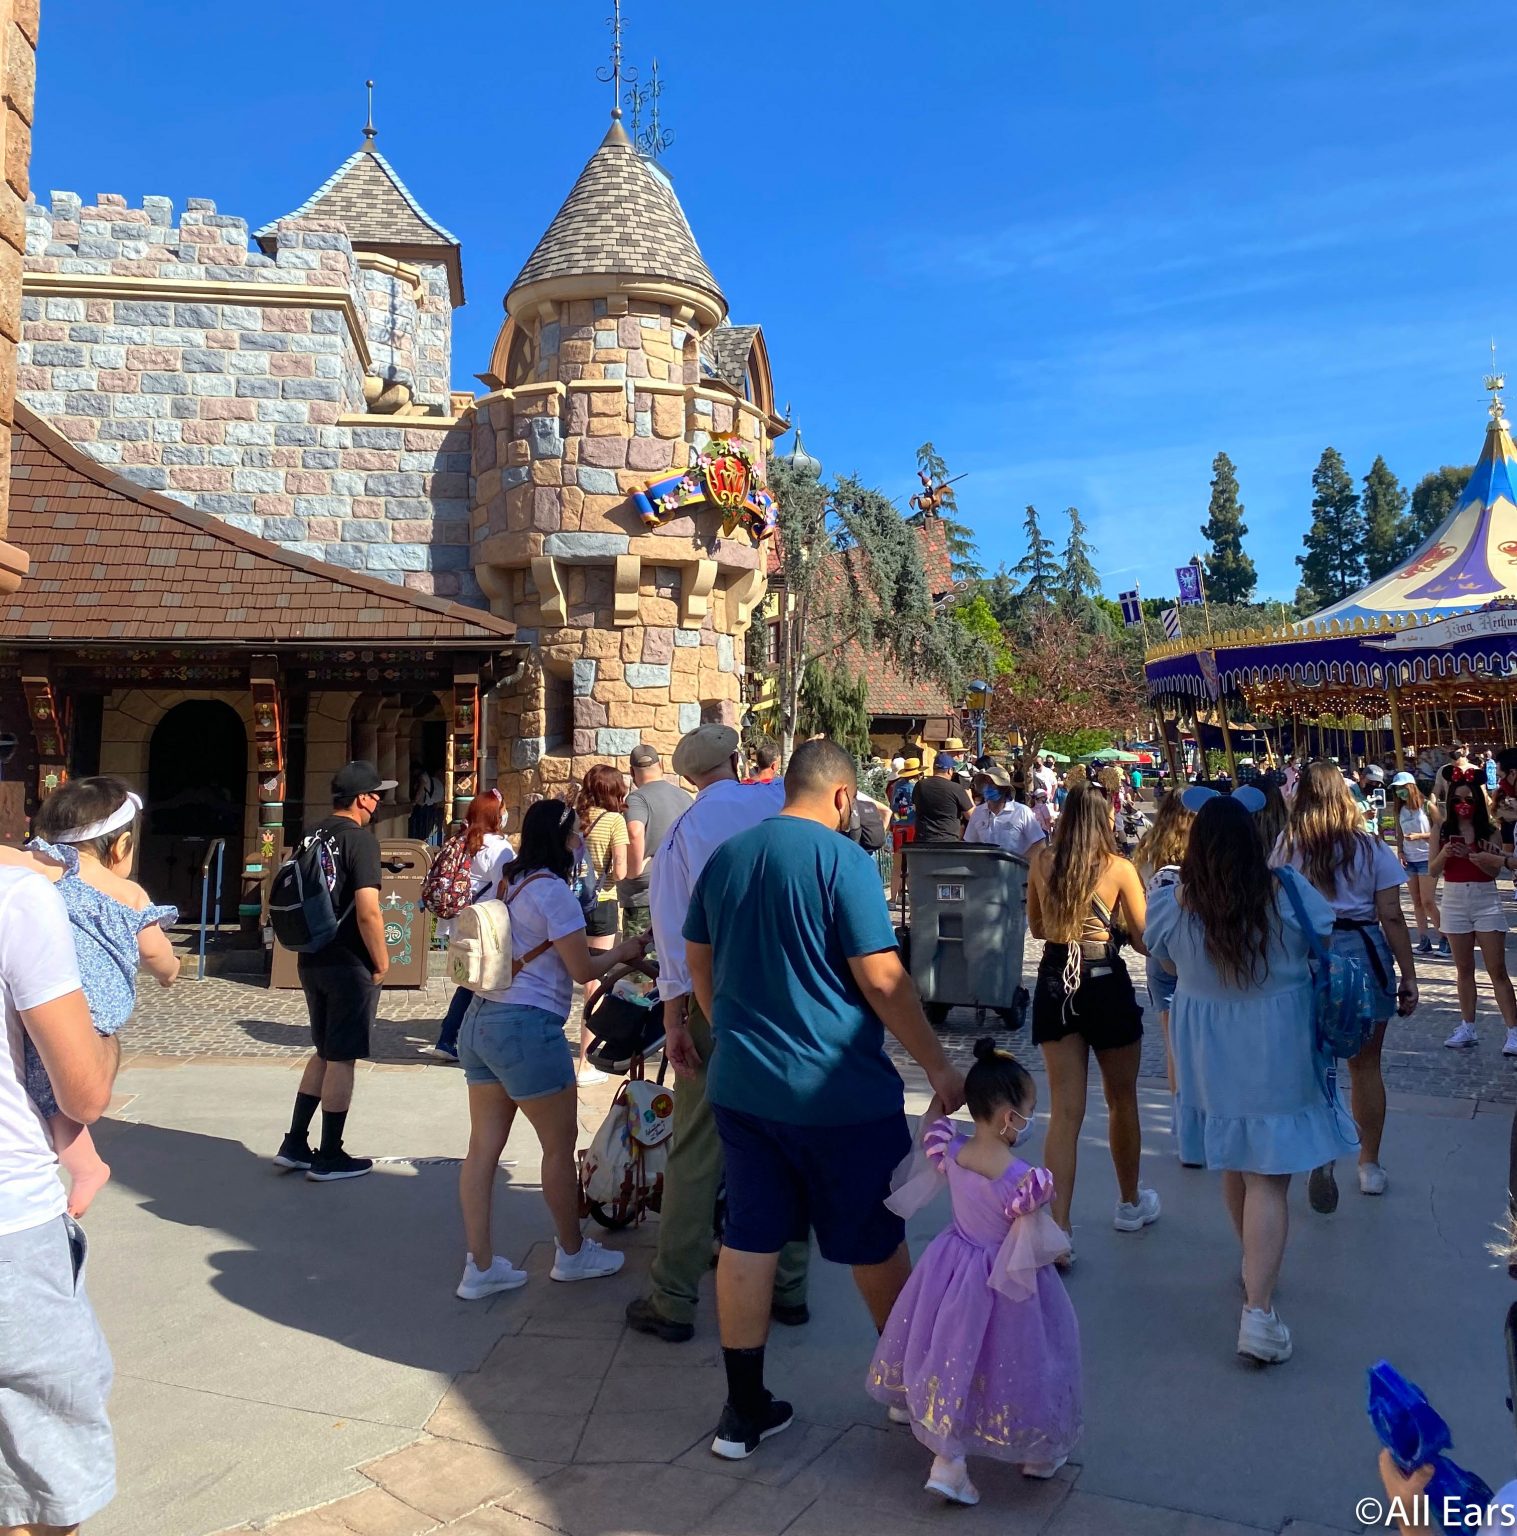 PHOTOS: Here's What Disneyland Crowds Looked Like On Reopening Day